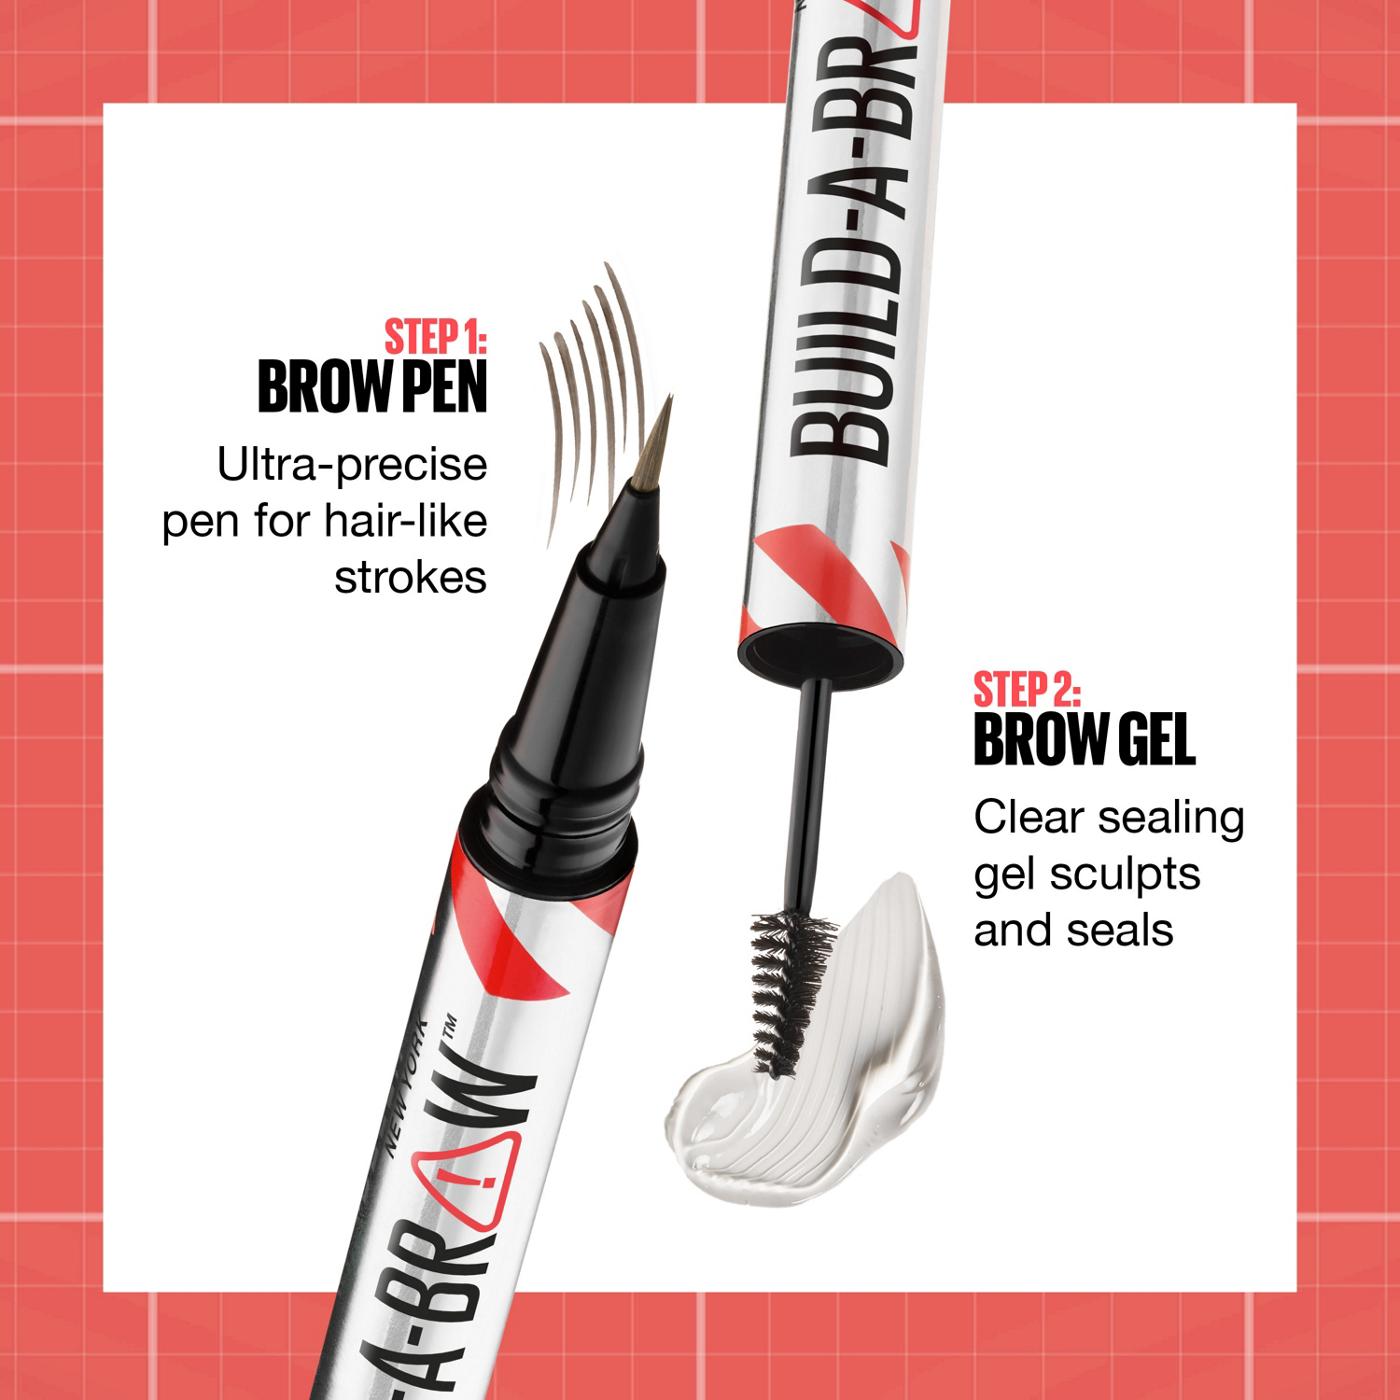 Maybelline Build A Brow 2 In 1 Brow Pen Soft Brown Shop Brow Pencils And Powder At H E B